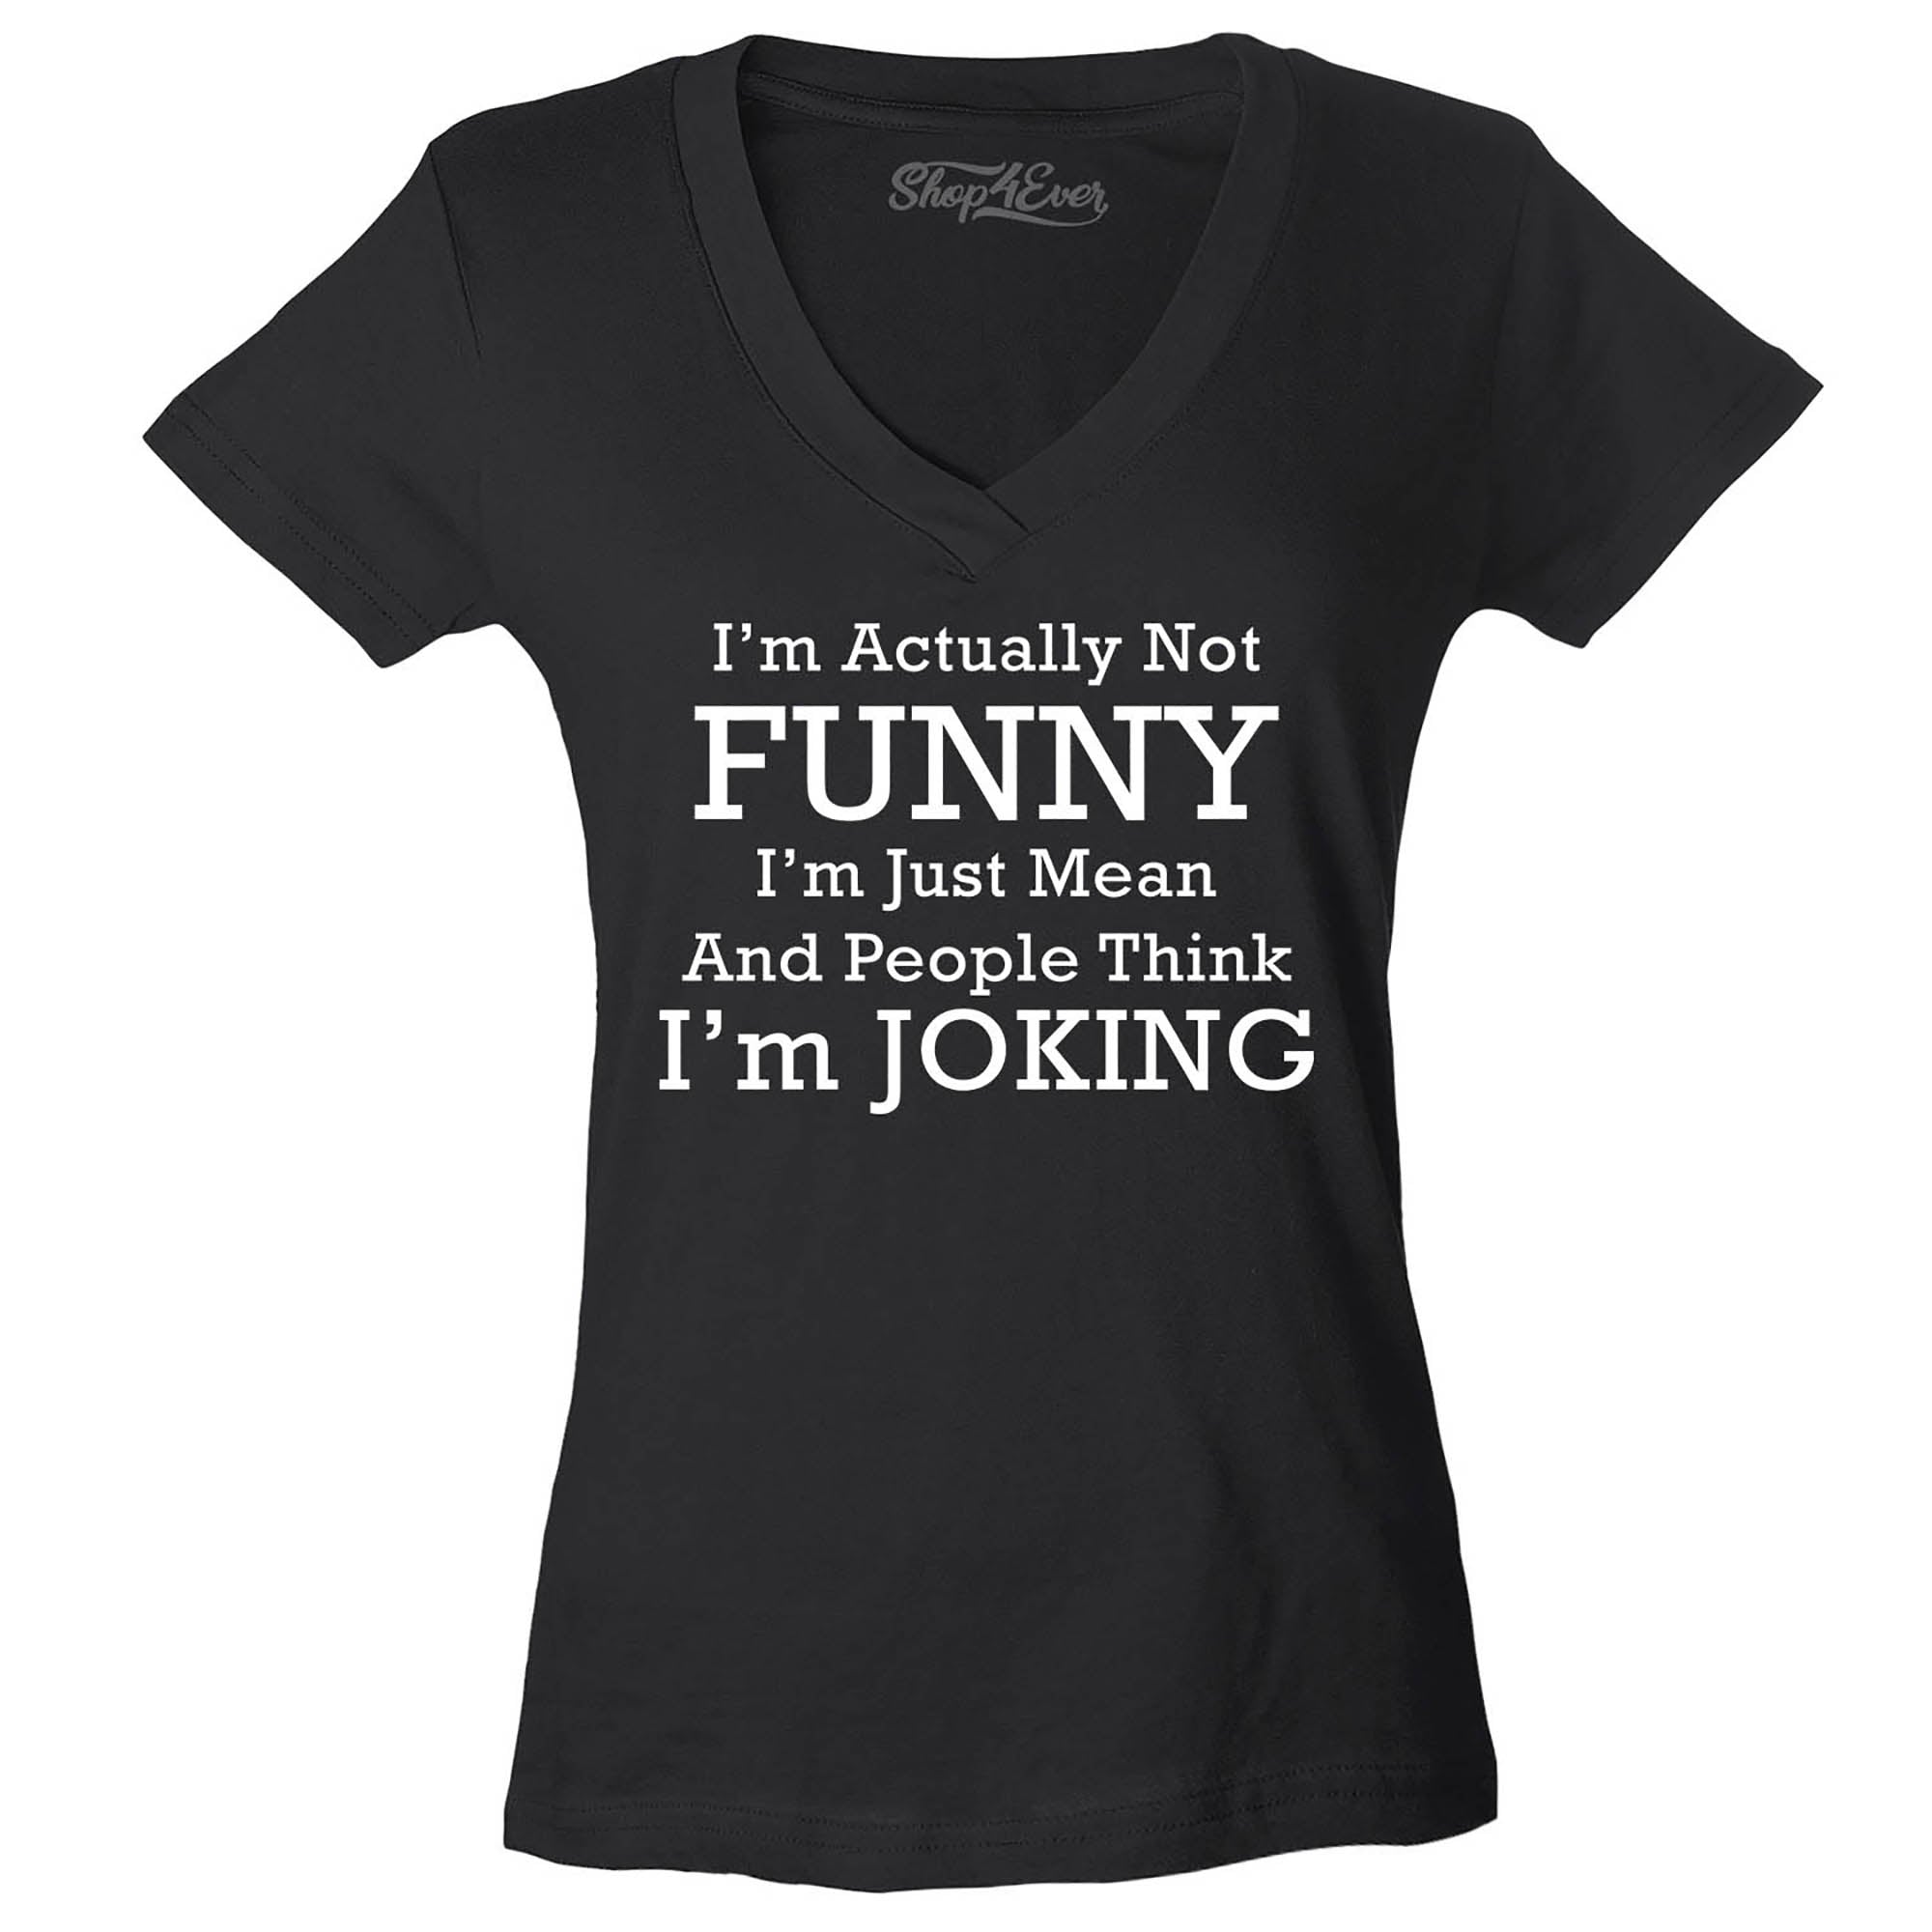 I'm Actually Not Funny I'm Just Mean Women's V-Neck T-Shirt Slim Fit